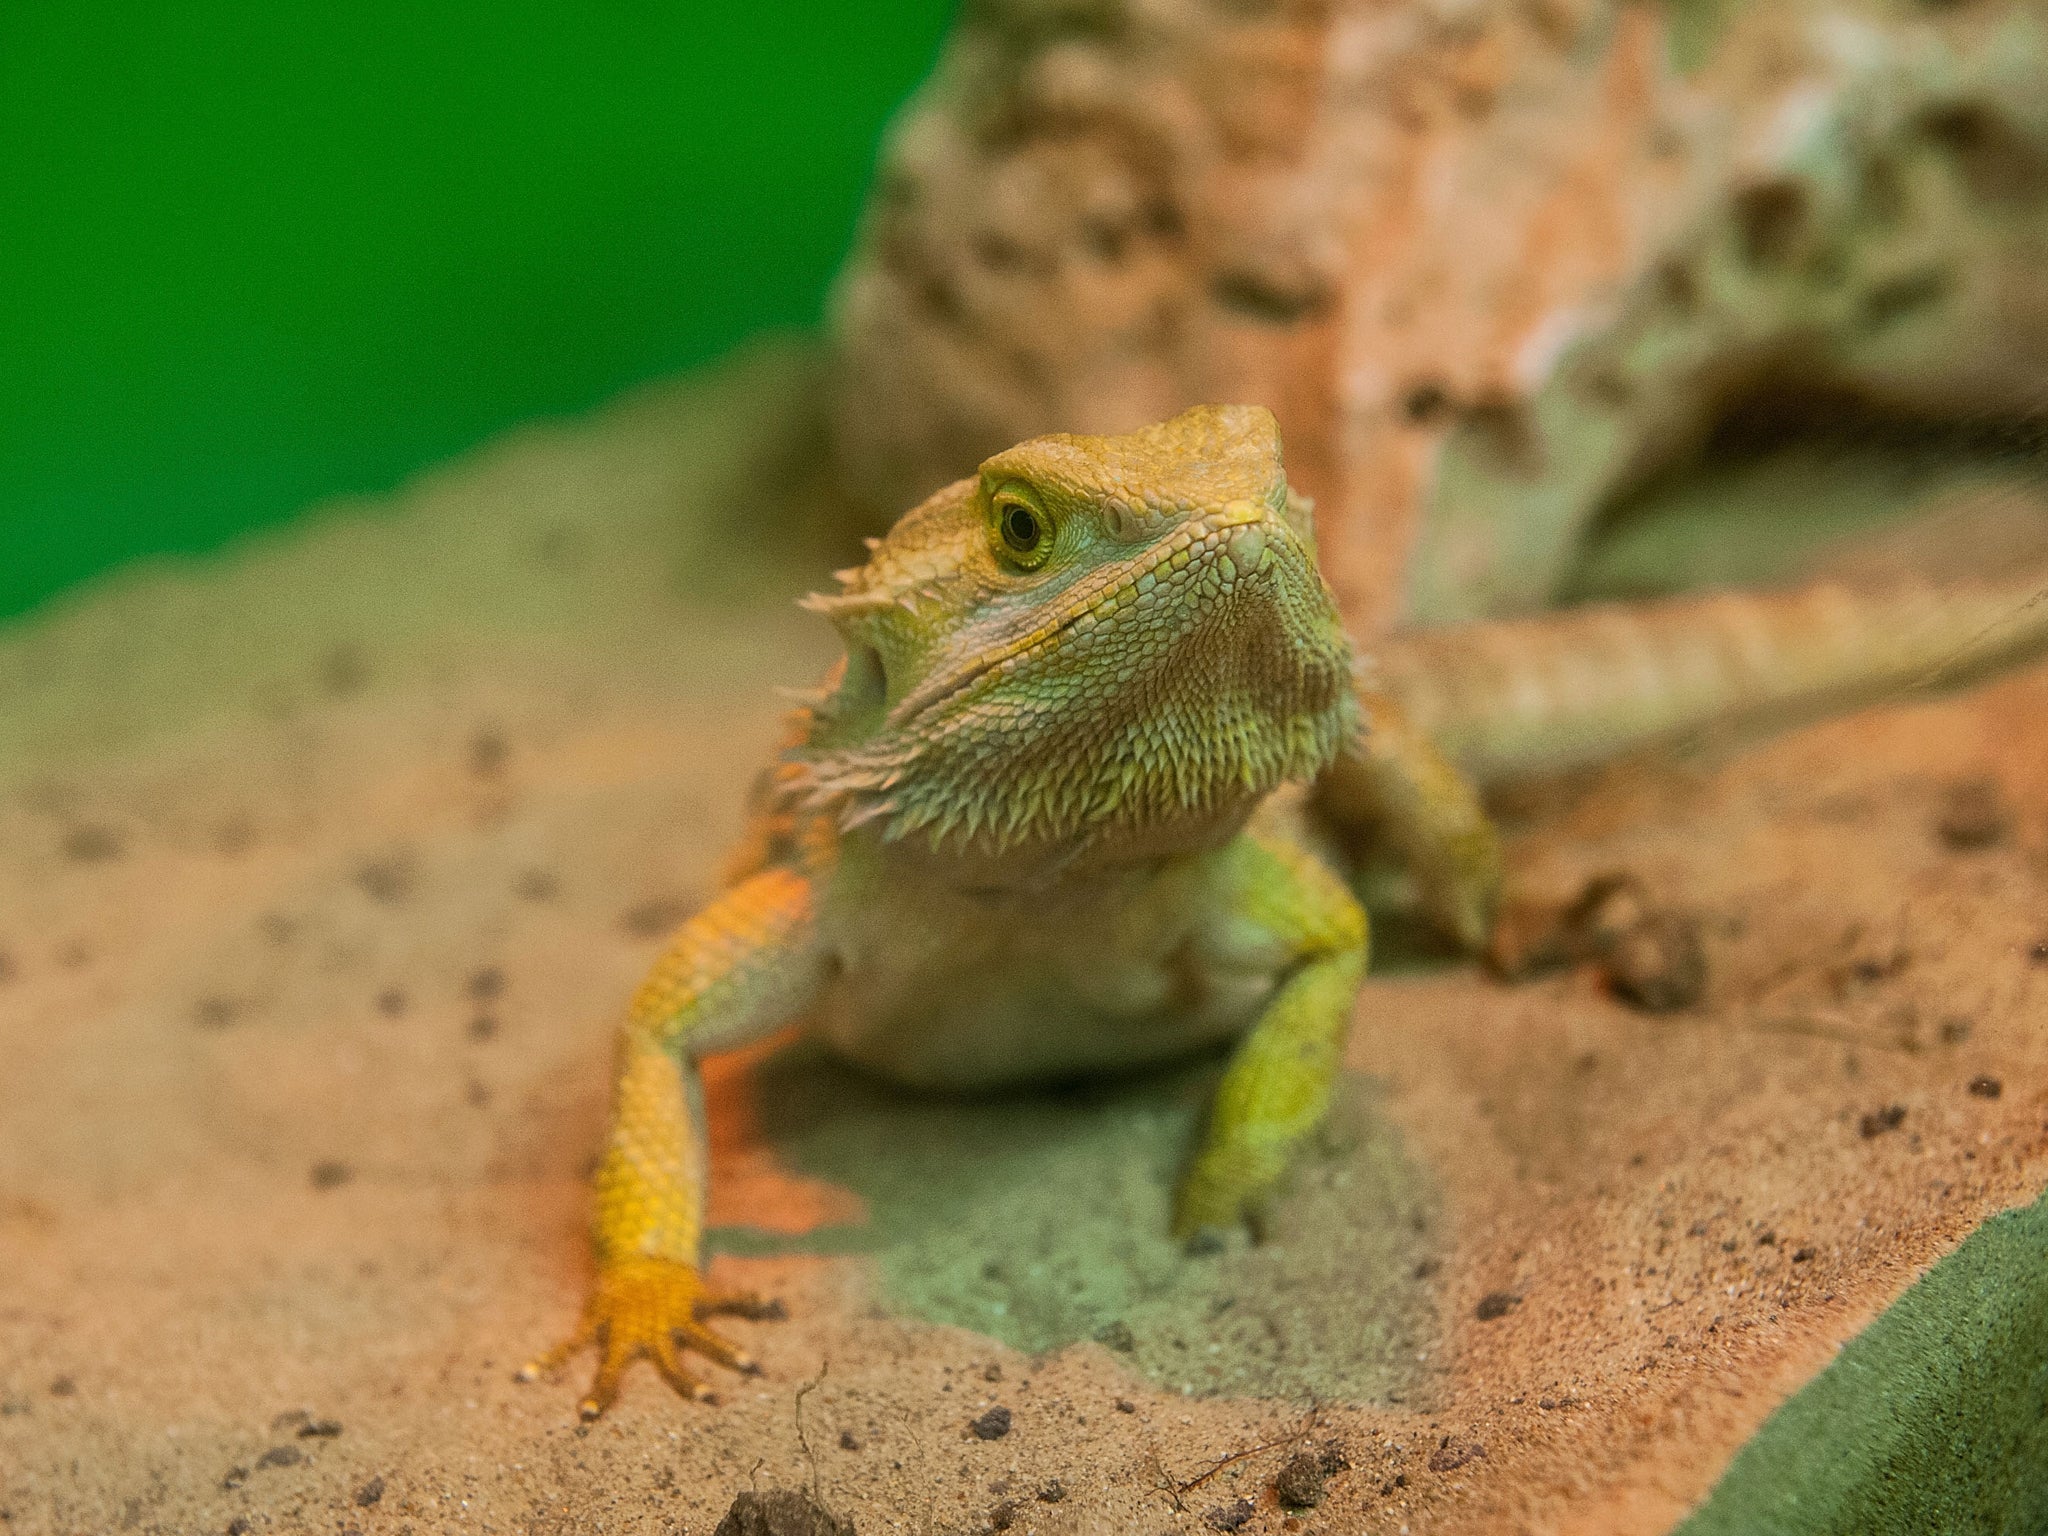 A 'Bearded Dragon' reptile is seen during the opening of the event 'Getting in touch with nature' in the new educational area at the Bioparco on October 12, 2013 in Rome, Italy